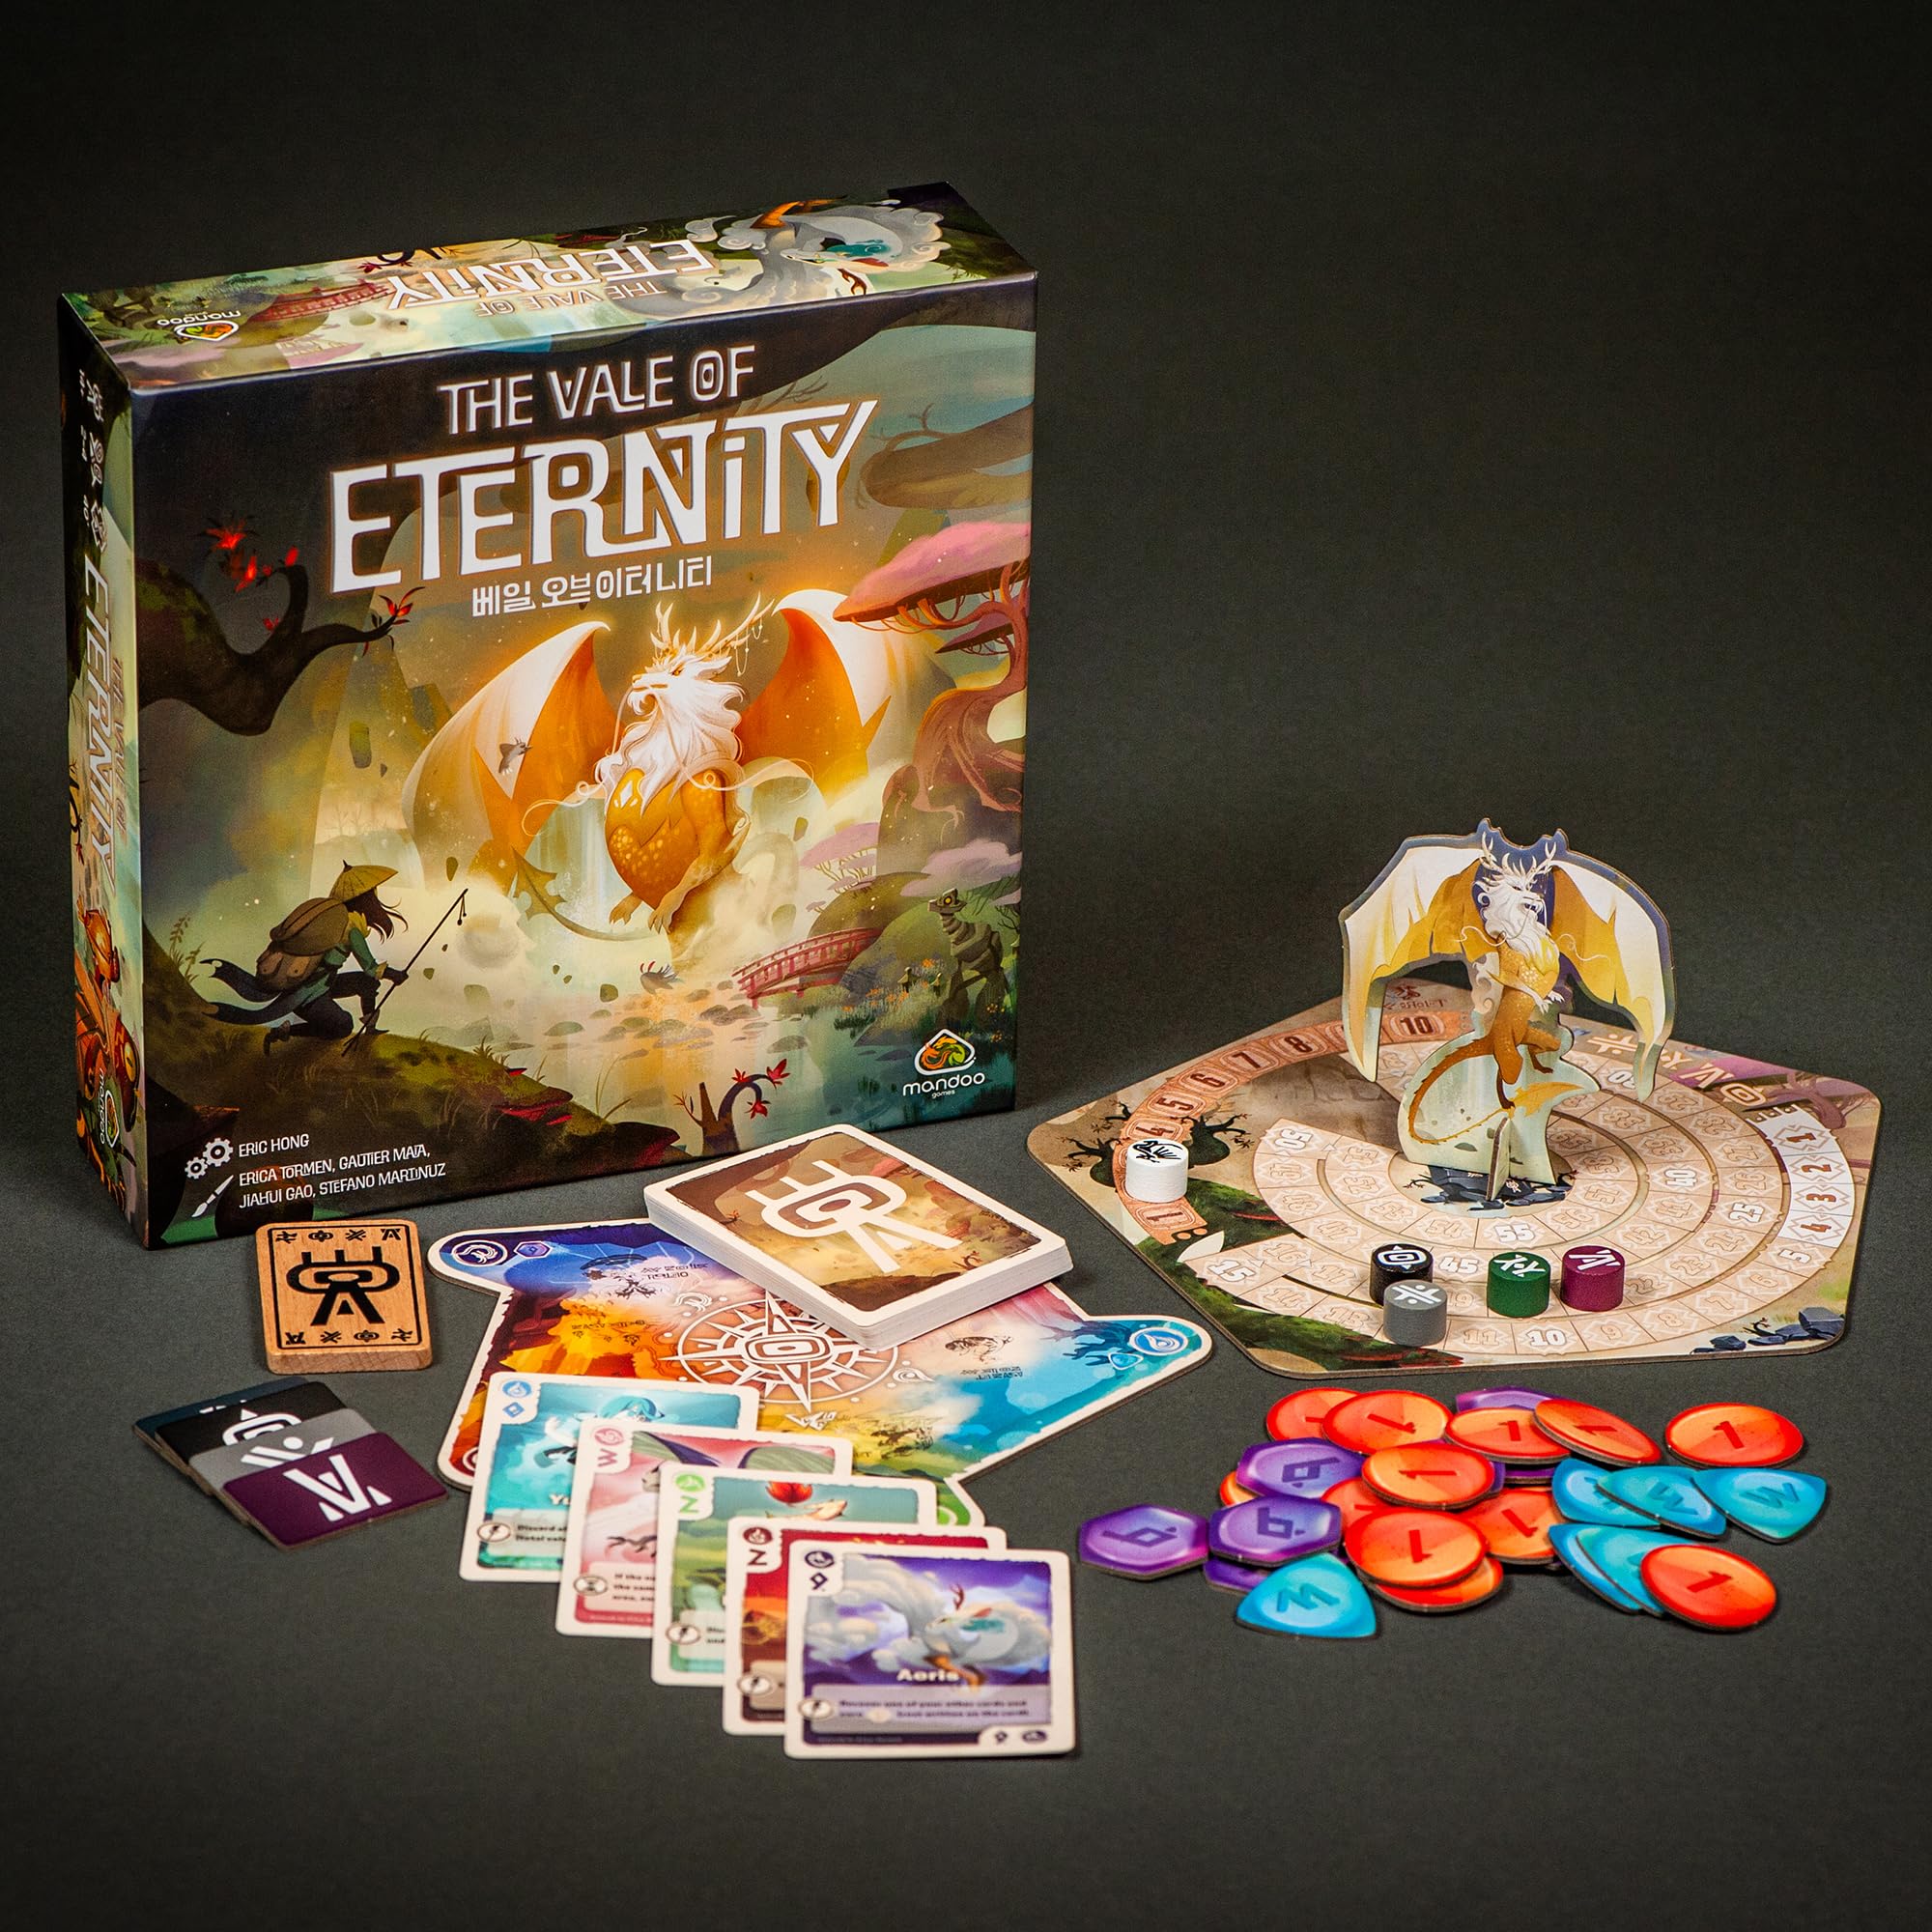 Renegade Game Studios: The Vale of Eternity - Drafting & Set Collection Card Game, Tame & Hunt Fantastical Monsters & Creatures, Ages 14+, 2-4 Players